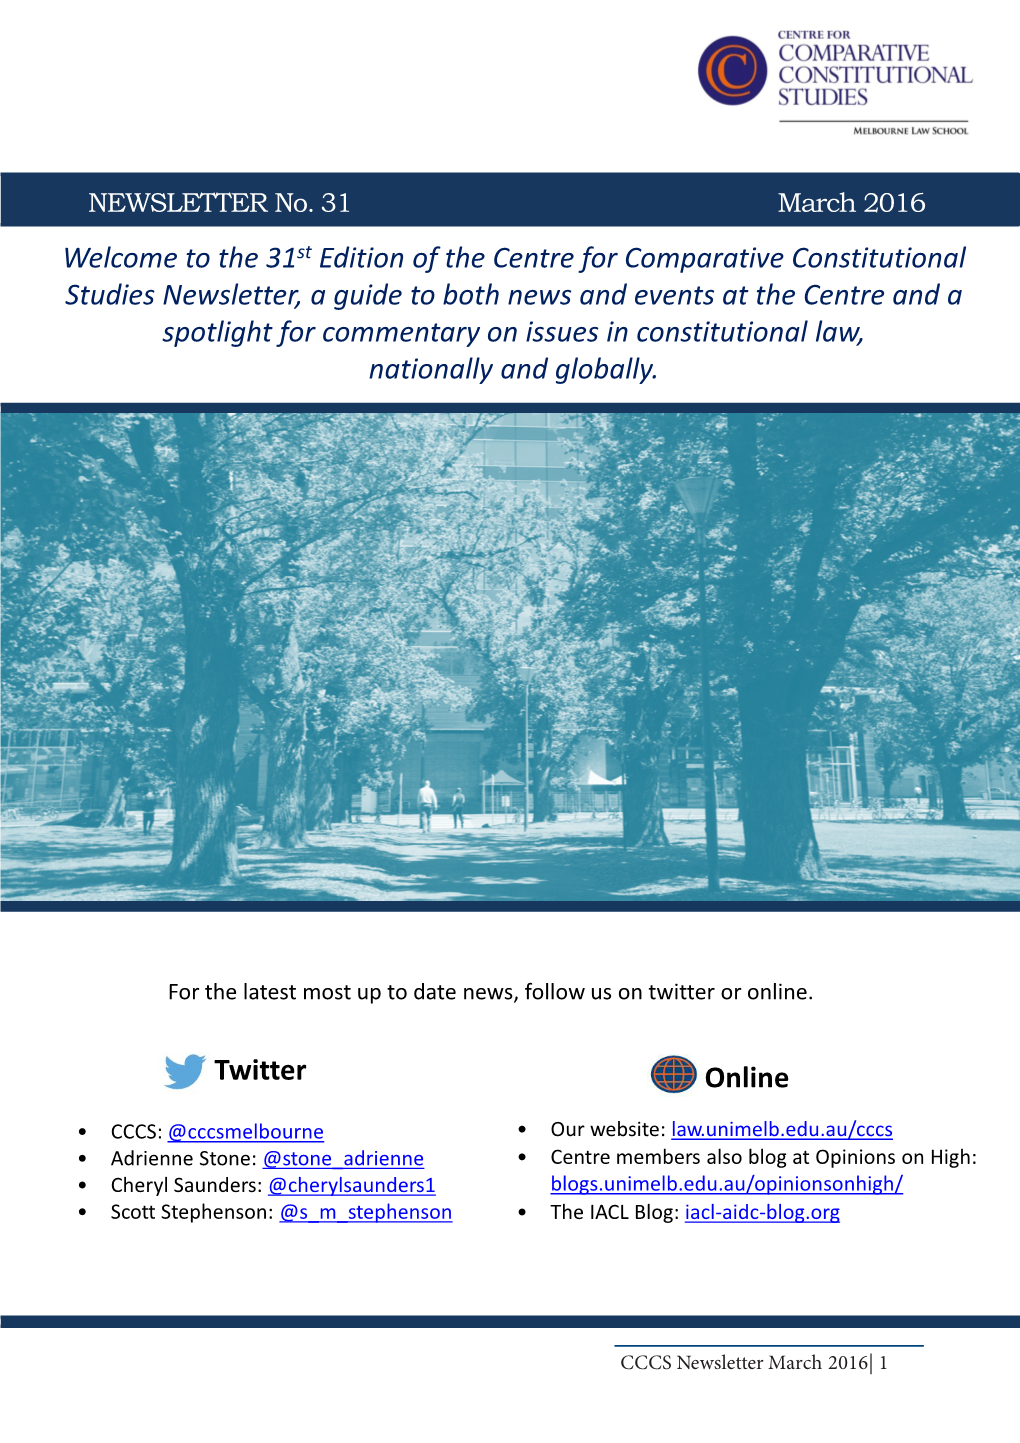 The 31St Edition of the Centre for Comparative Constitutional